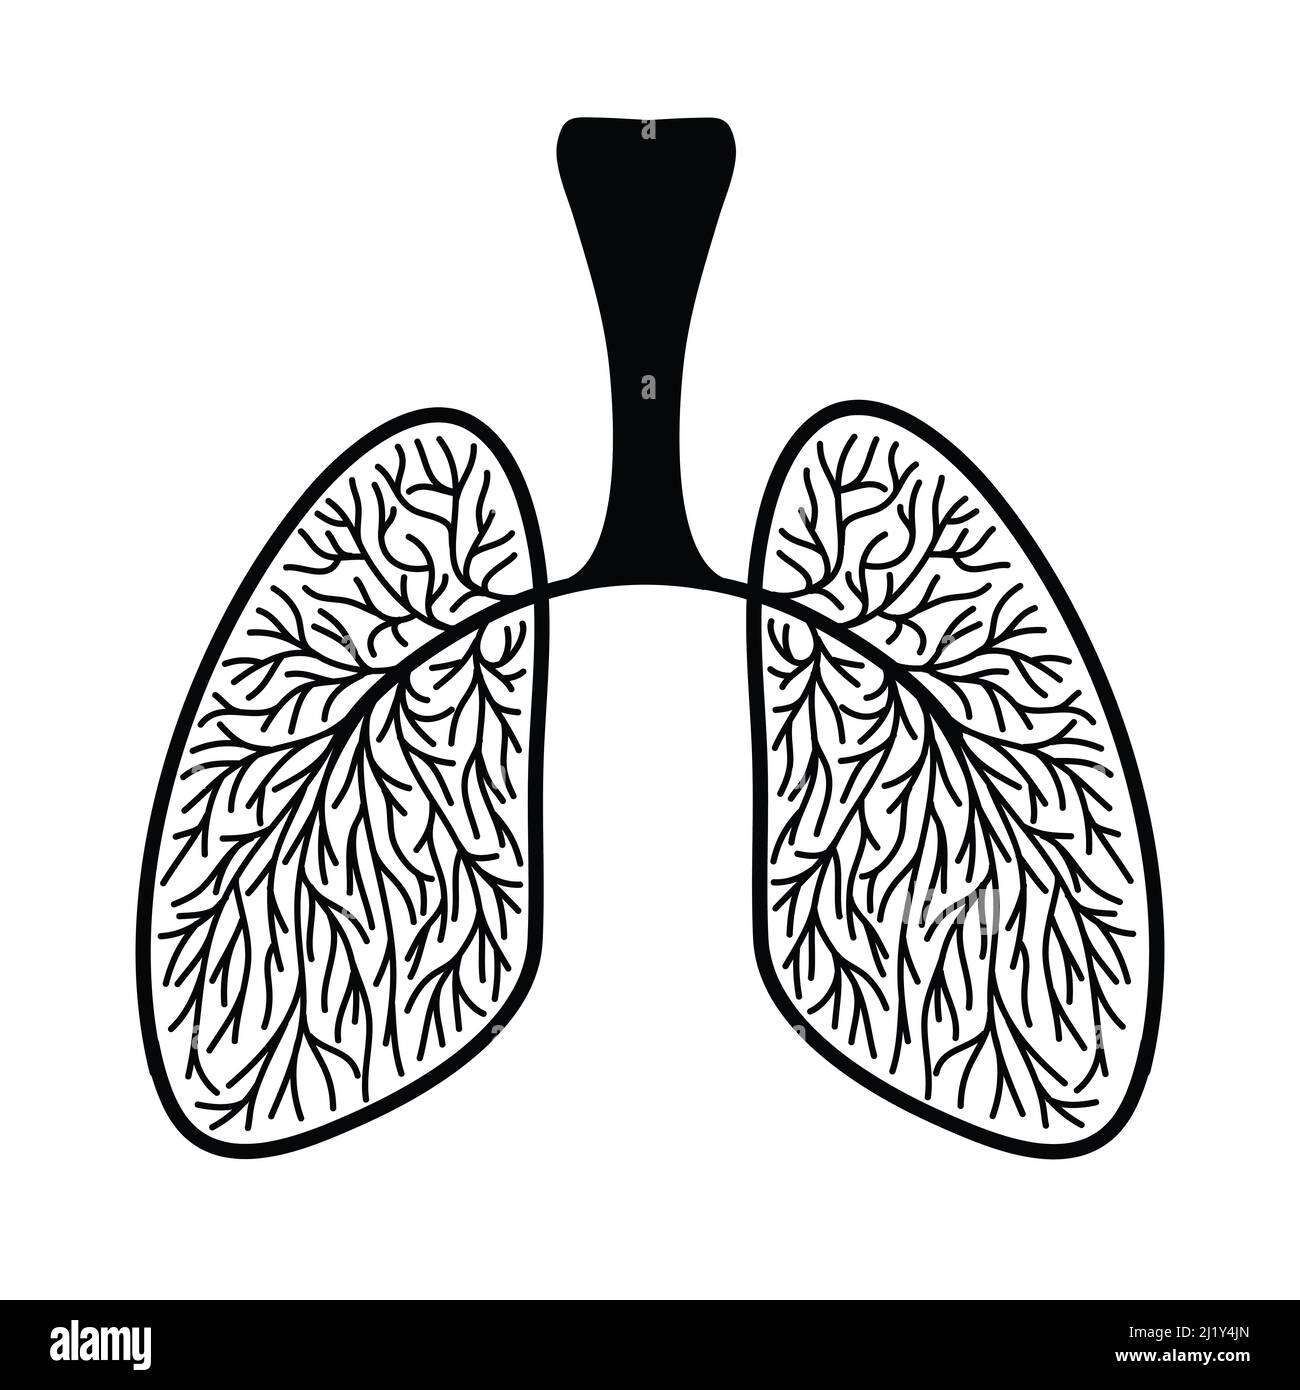 How to Draw Lungs  Respiratory System of a Human  YouTube